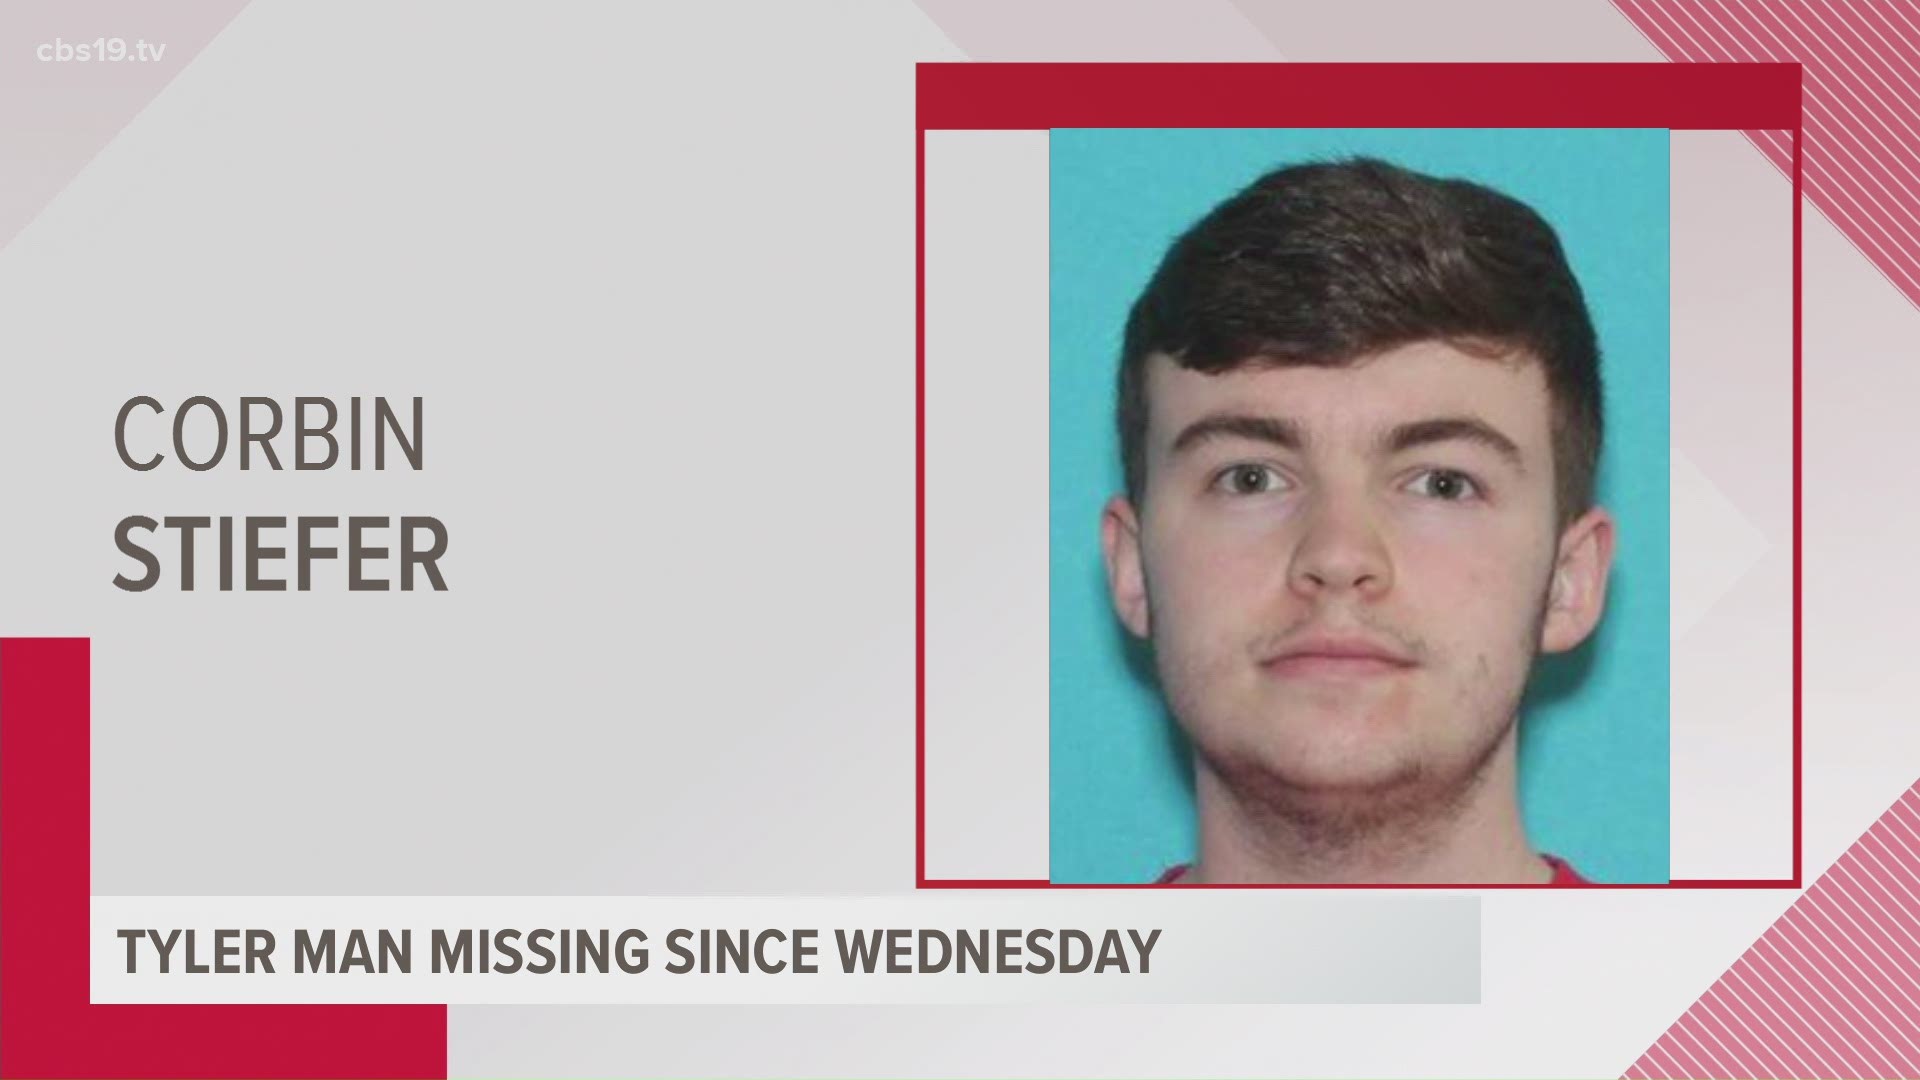 Corbin Stiefer, 21, was last seen on January 6 on Briar Creek Drive in Tyler. According to the family, he is very ill.